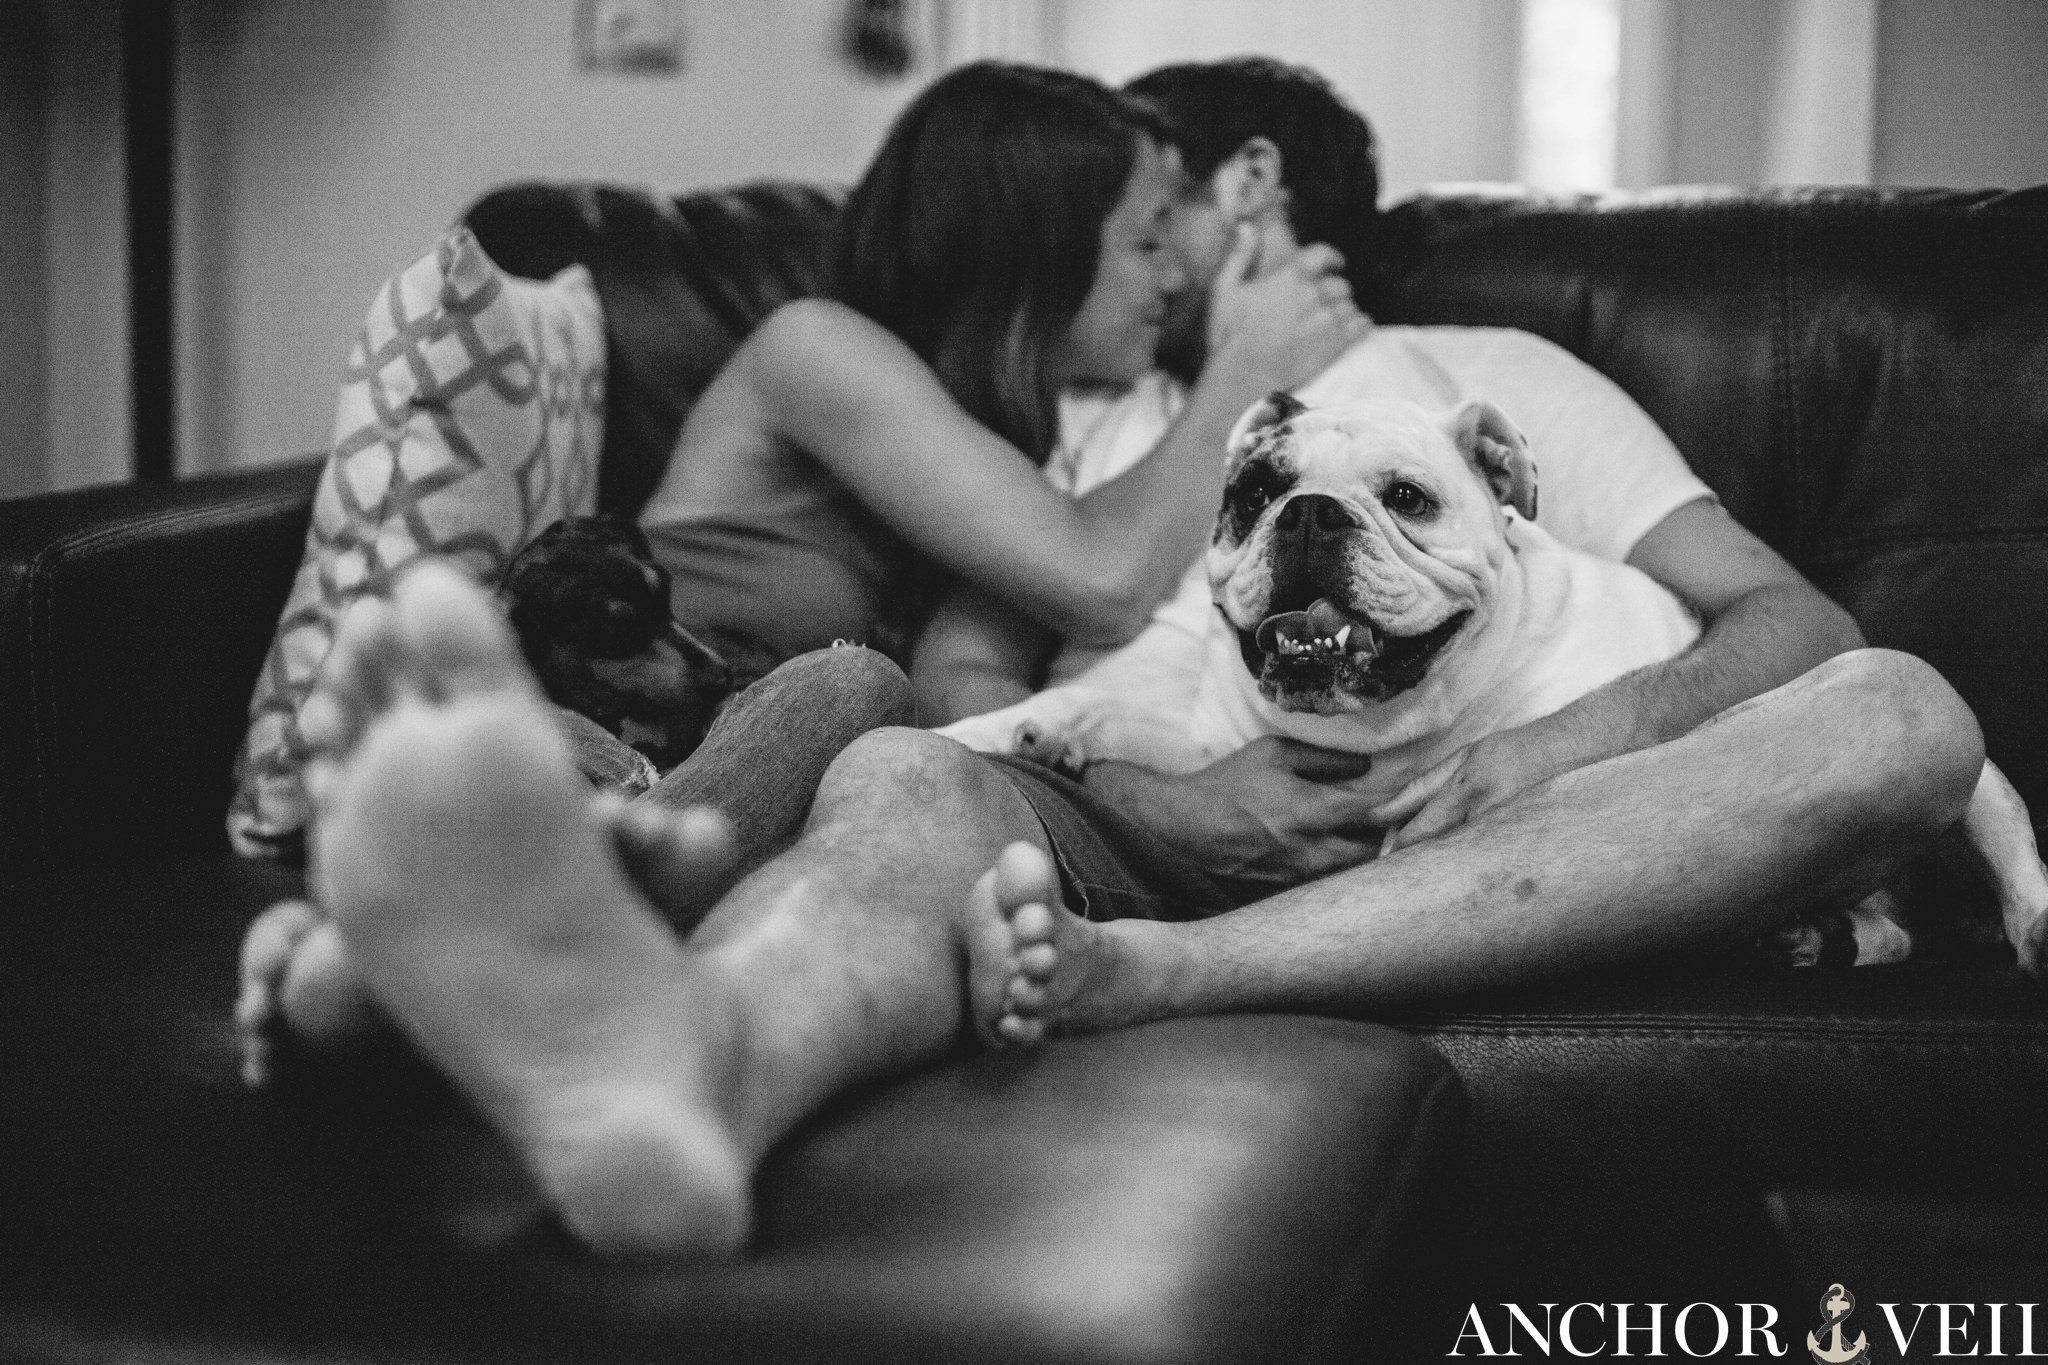 on the couch, kissing with the dogs watching